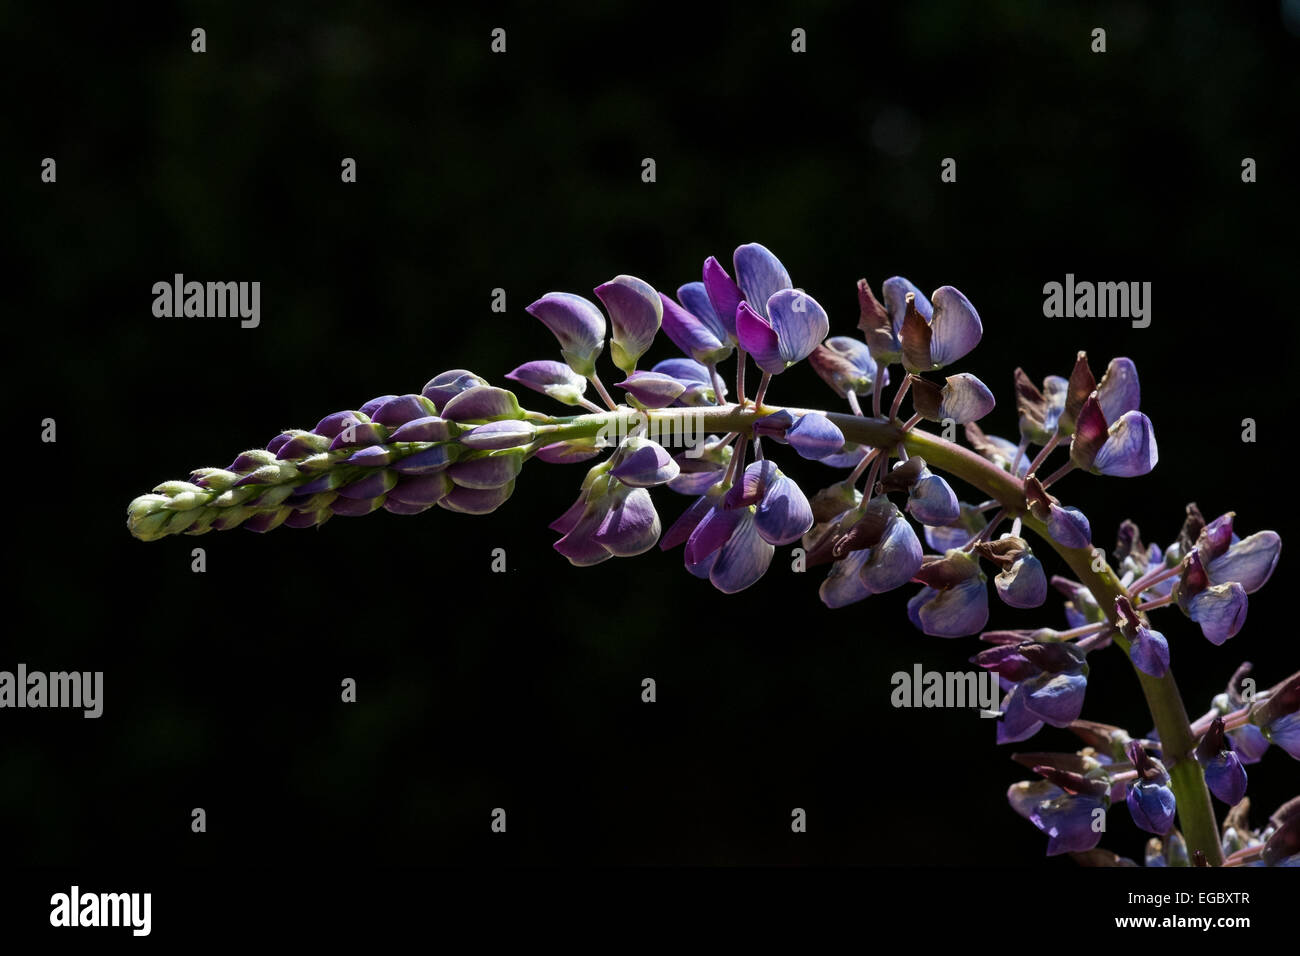 Purple Lupin flowers against a dark background Stock Photo